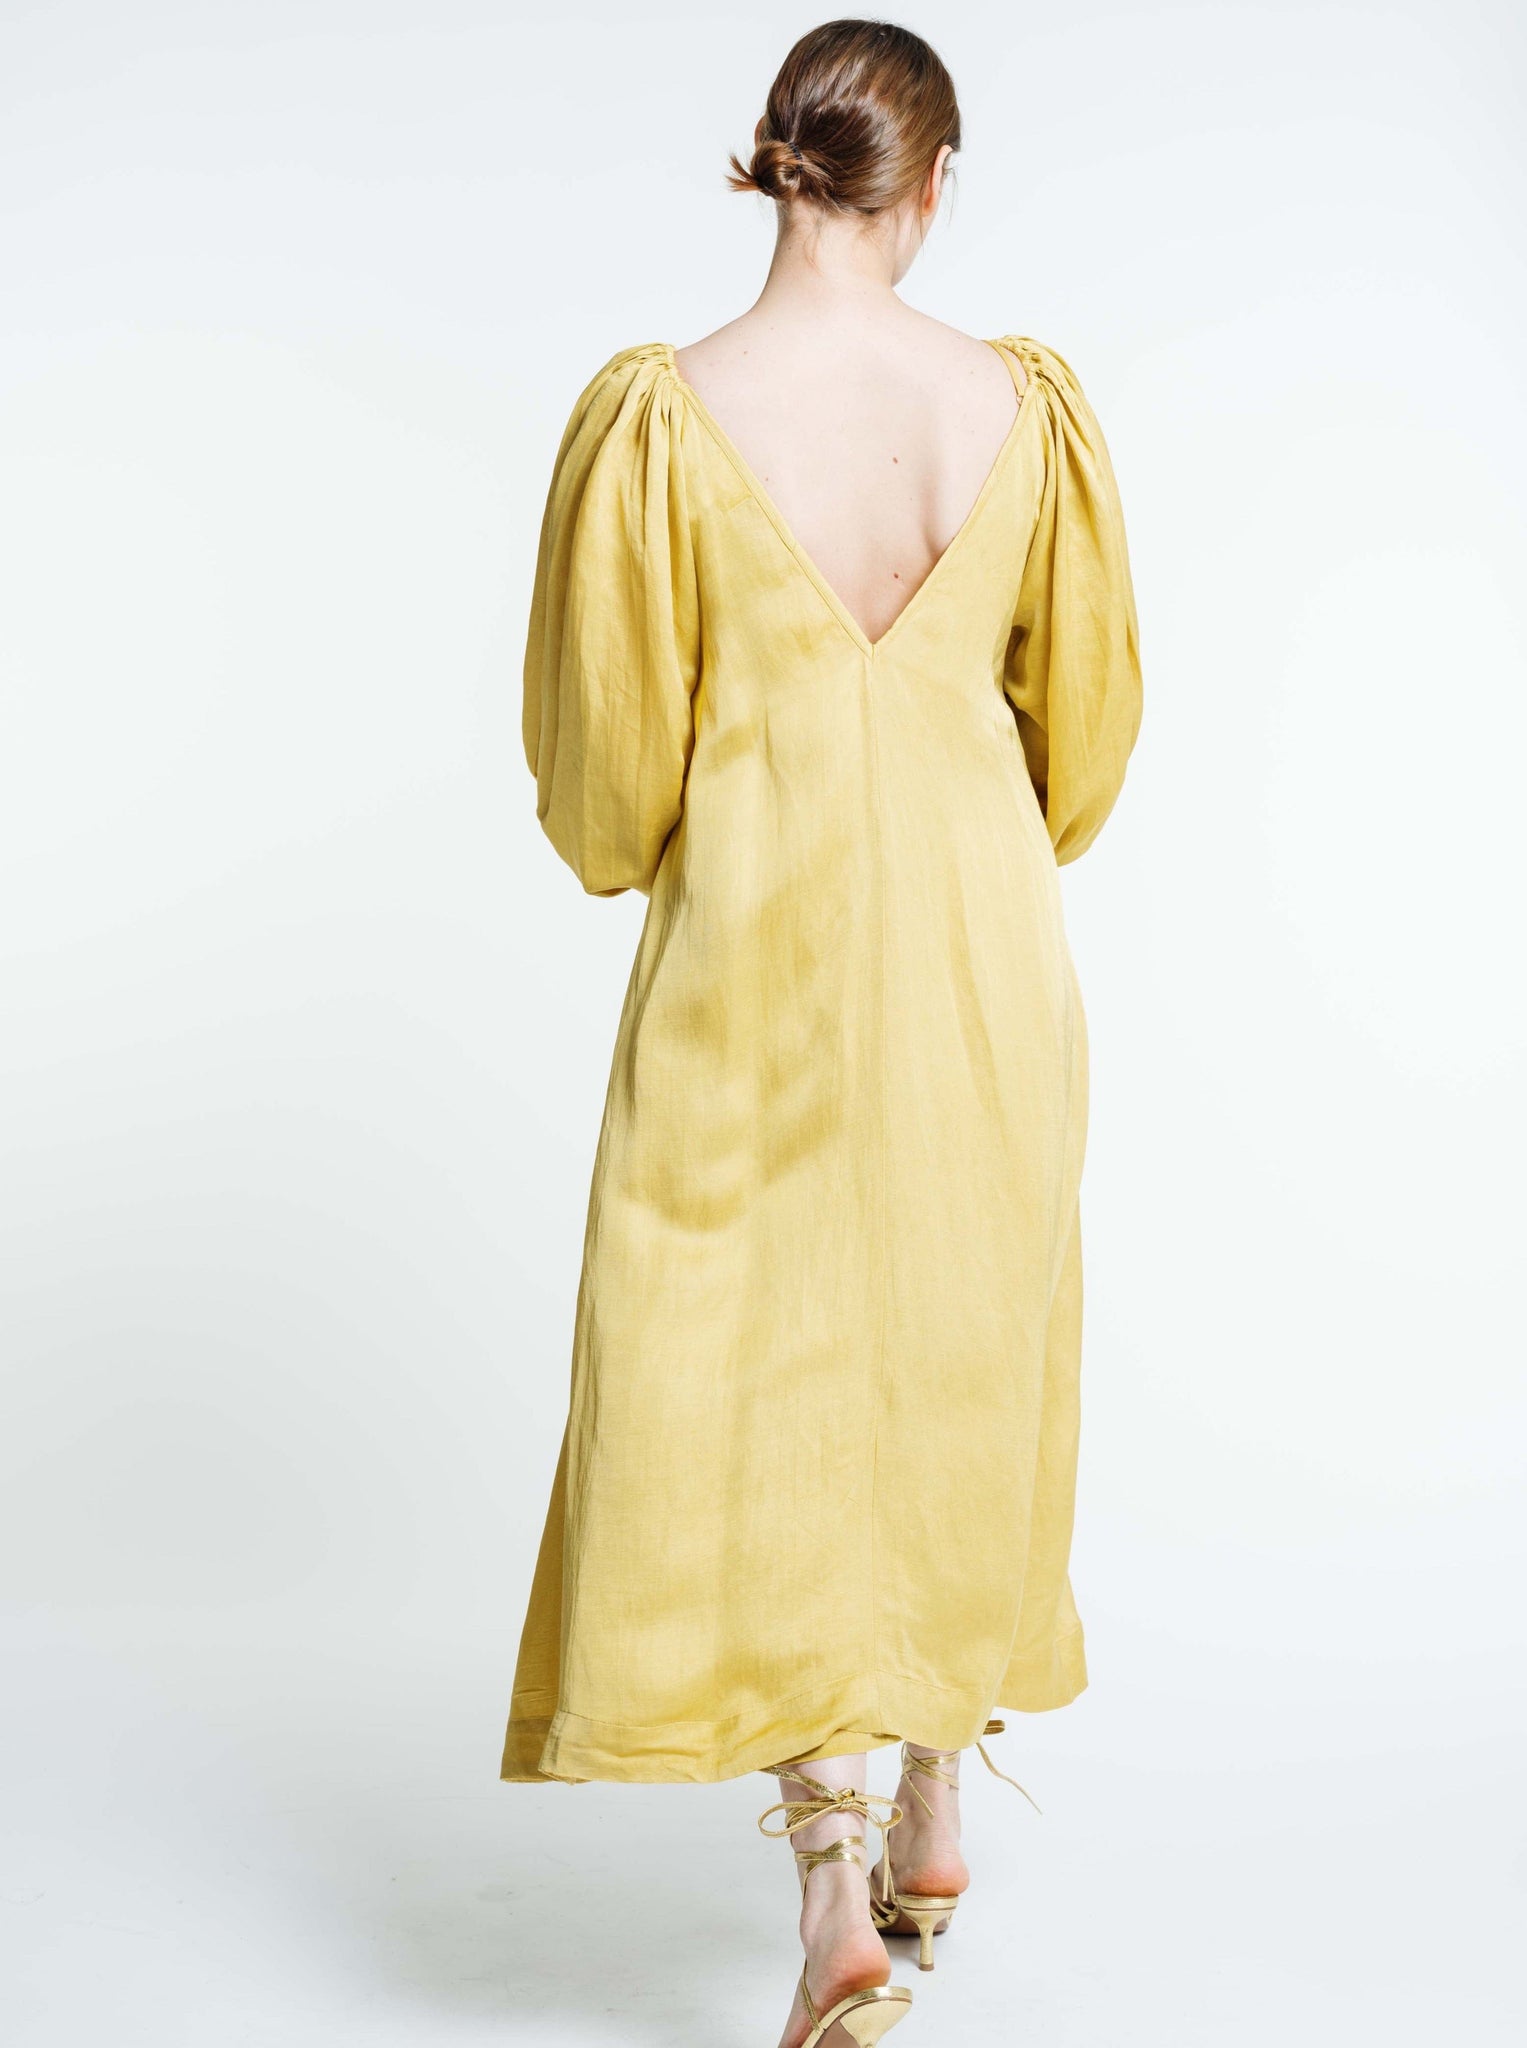 The back view of a woman wearing a Lupita Maxi Dress - Citrine made of satin fabric.